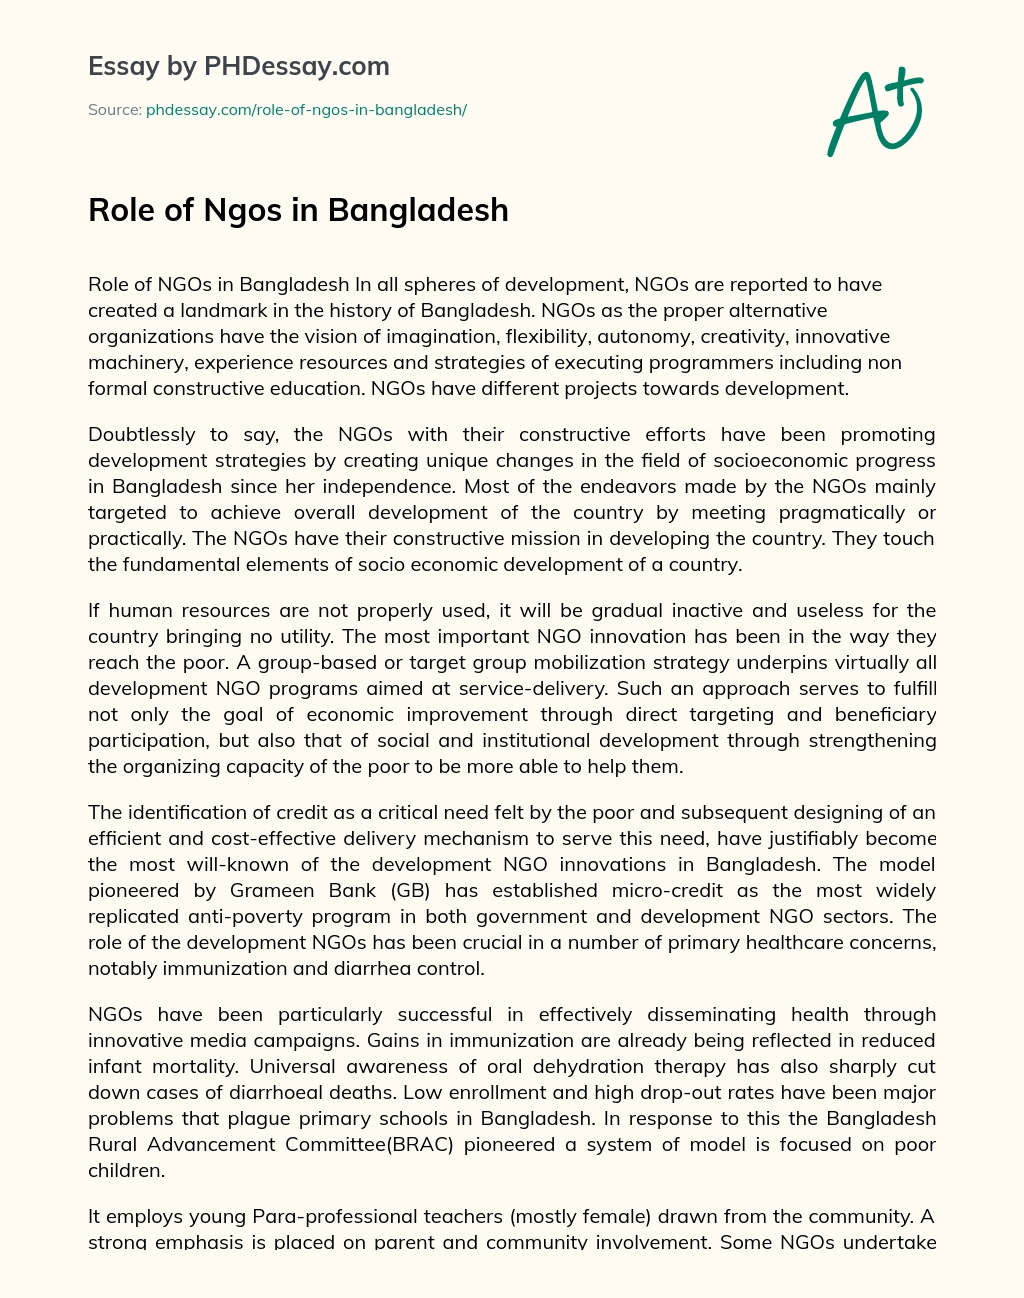 Role of Ngos in Bangladesh essay